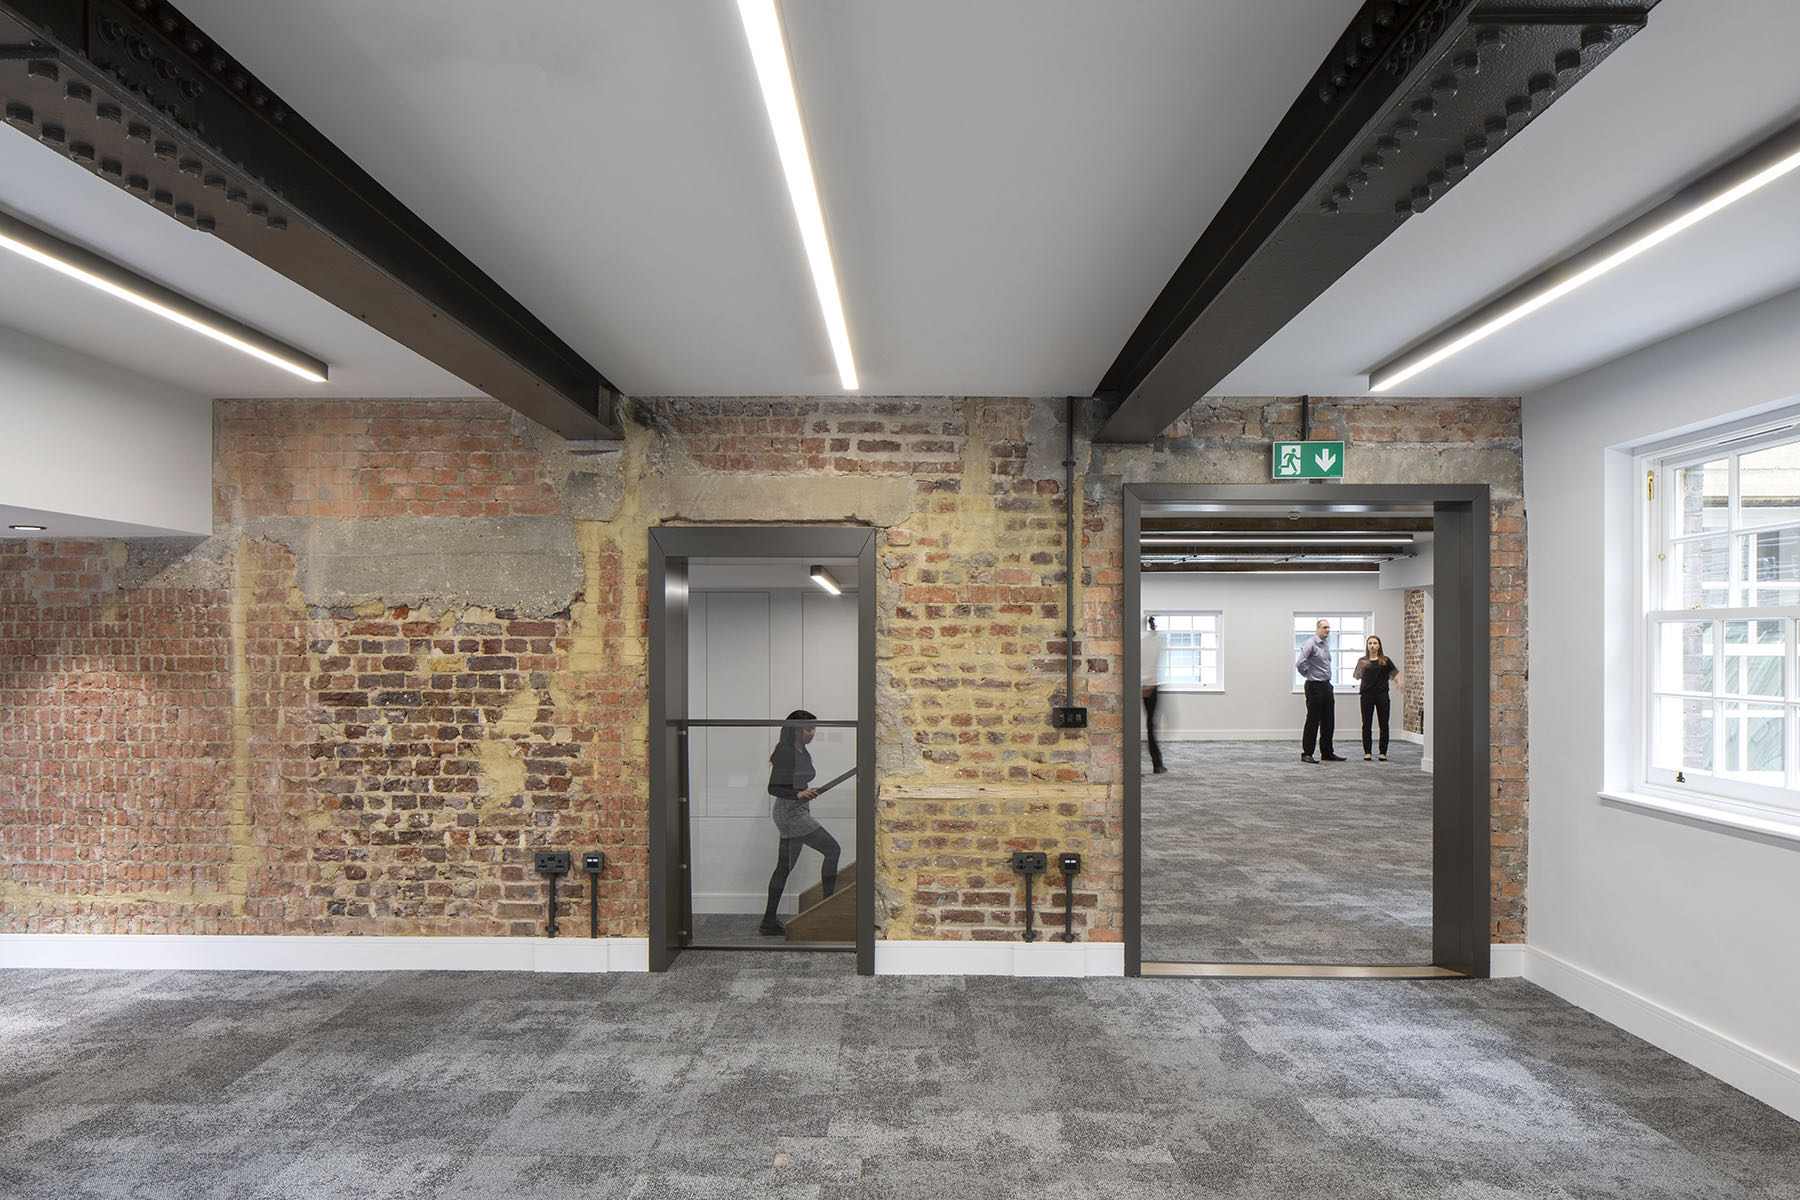 A Tour of Frederick’s Place Office Buildings in London